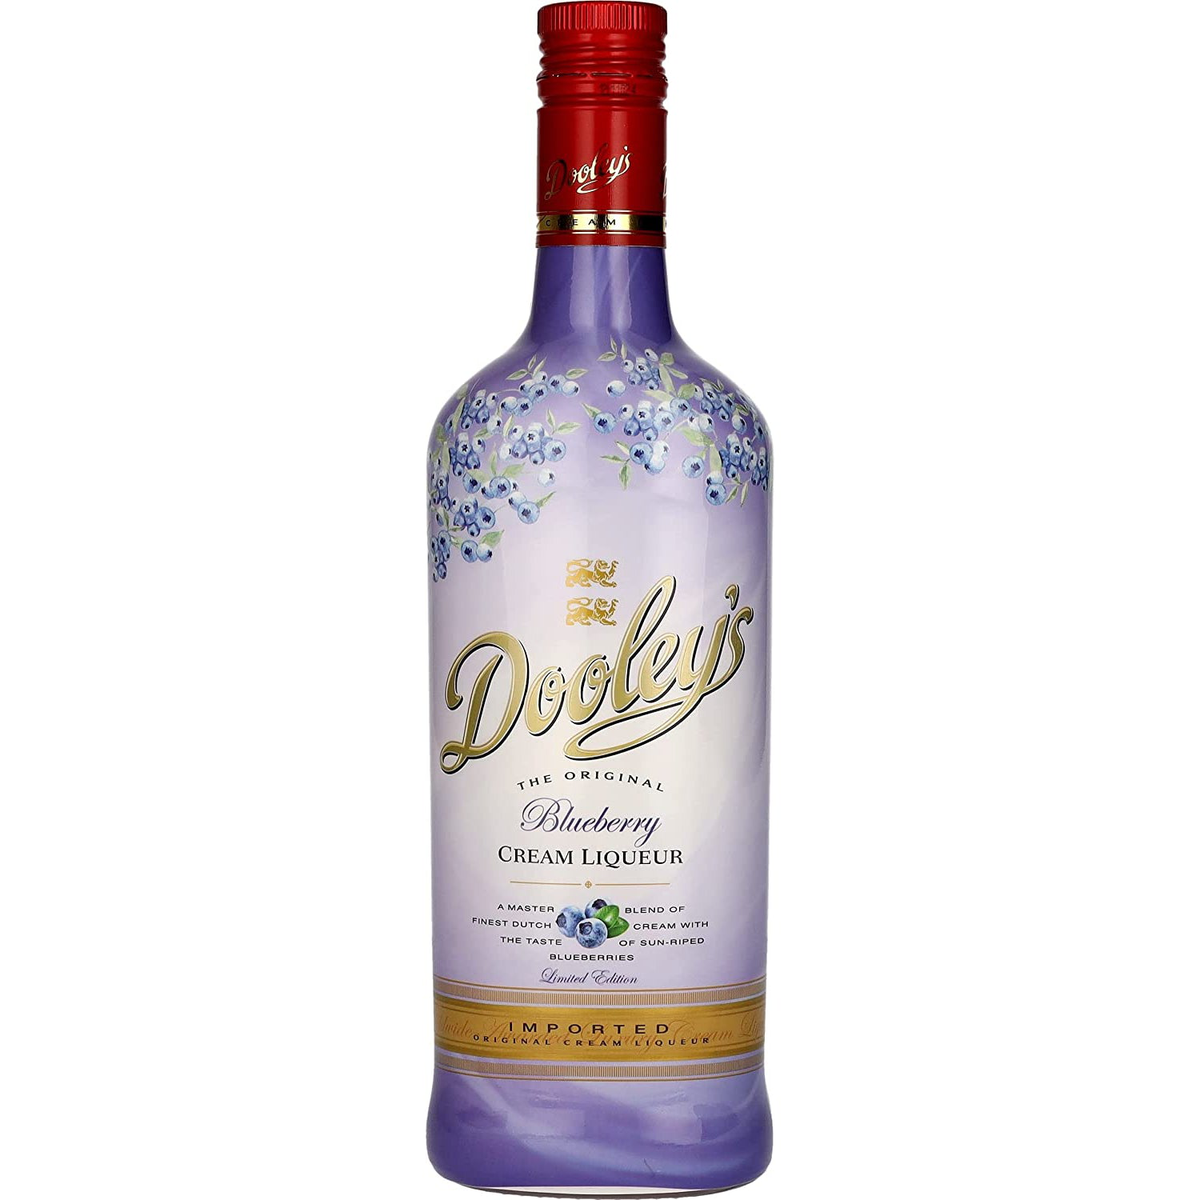 Dooley's Blueberry Cream Liqueur Limited Edition 15% Vol. 0,7L | Winebuyers